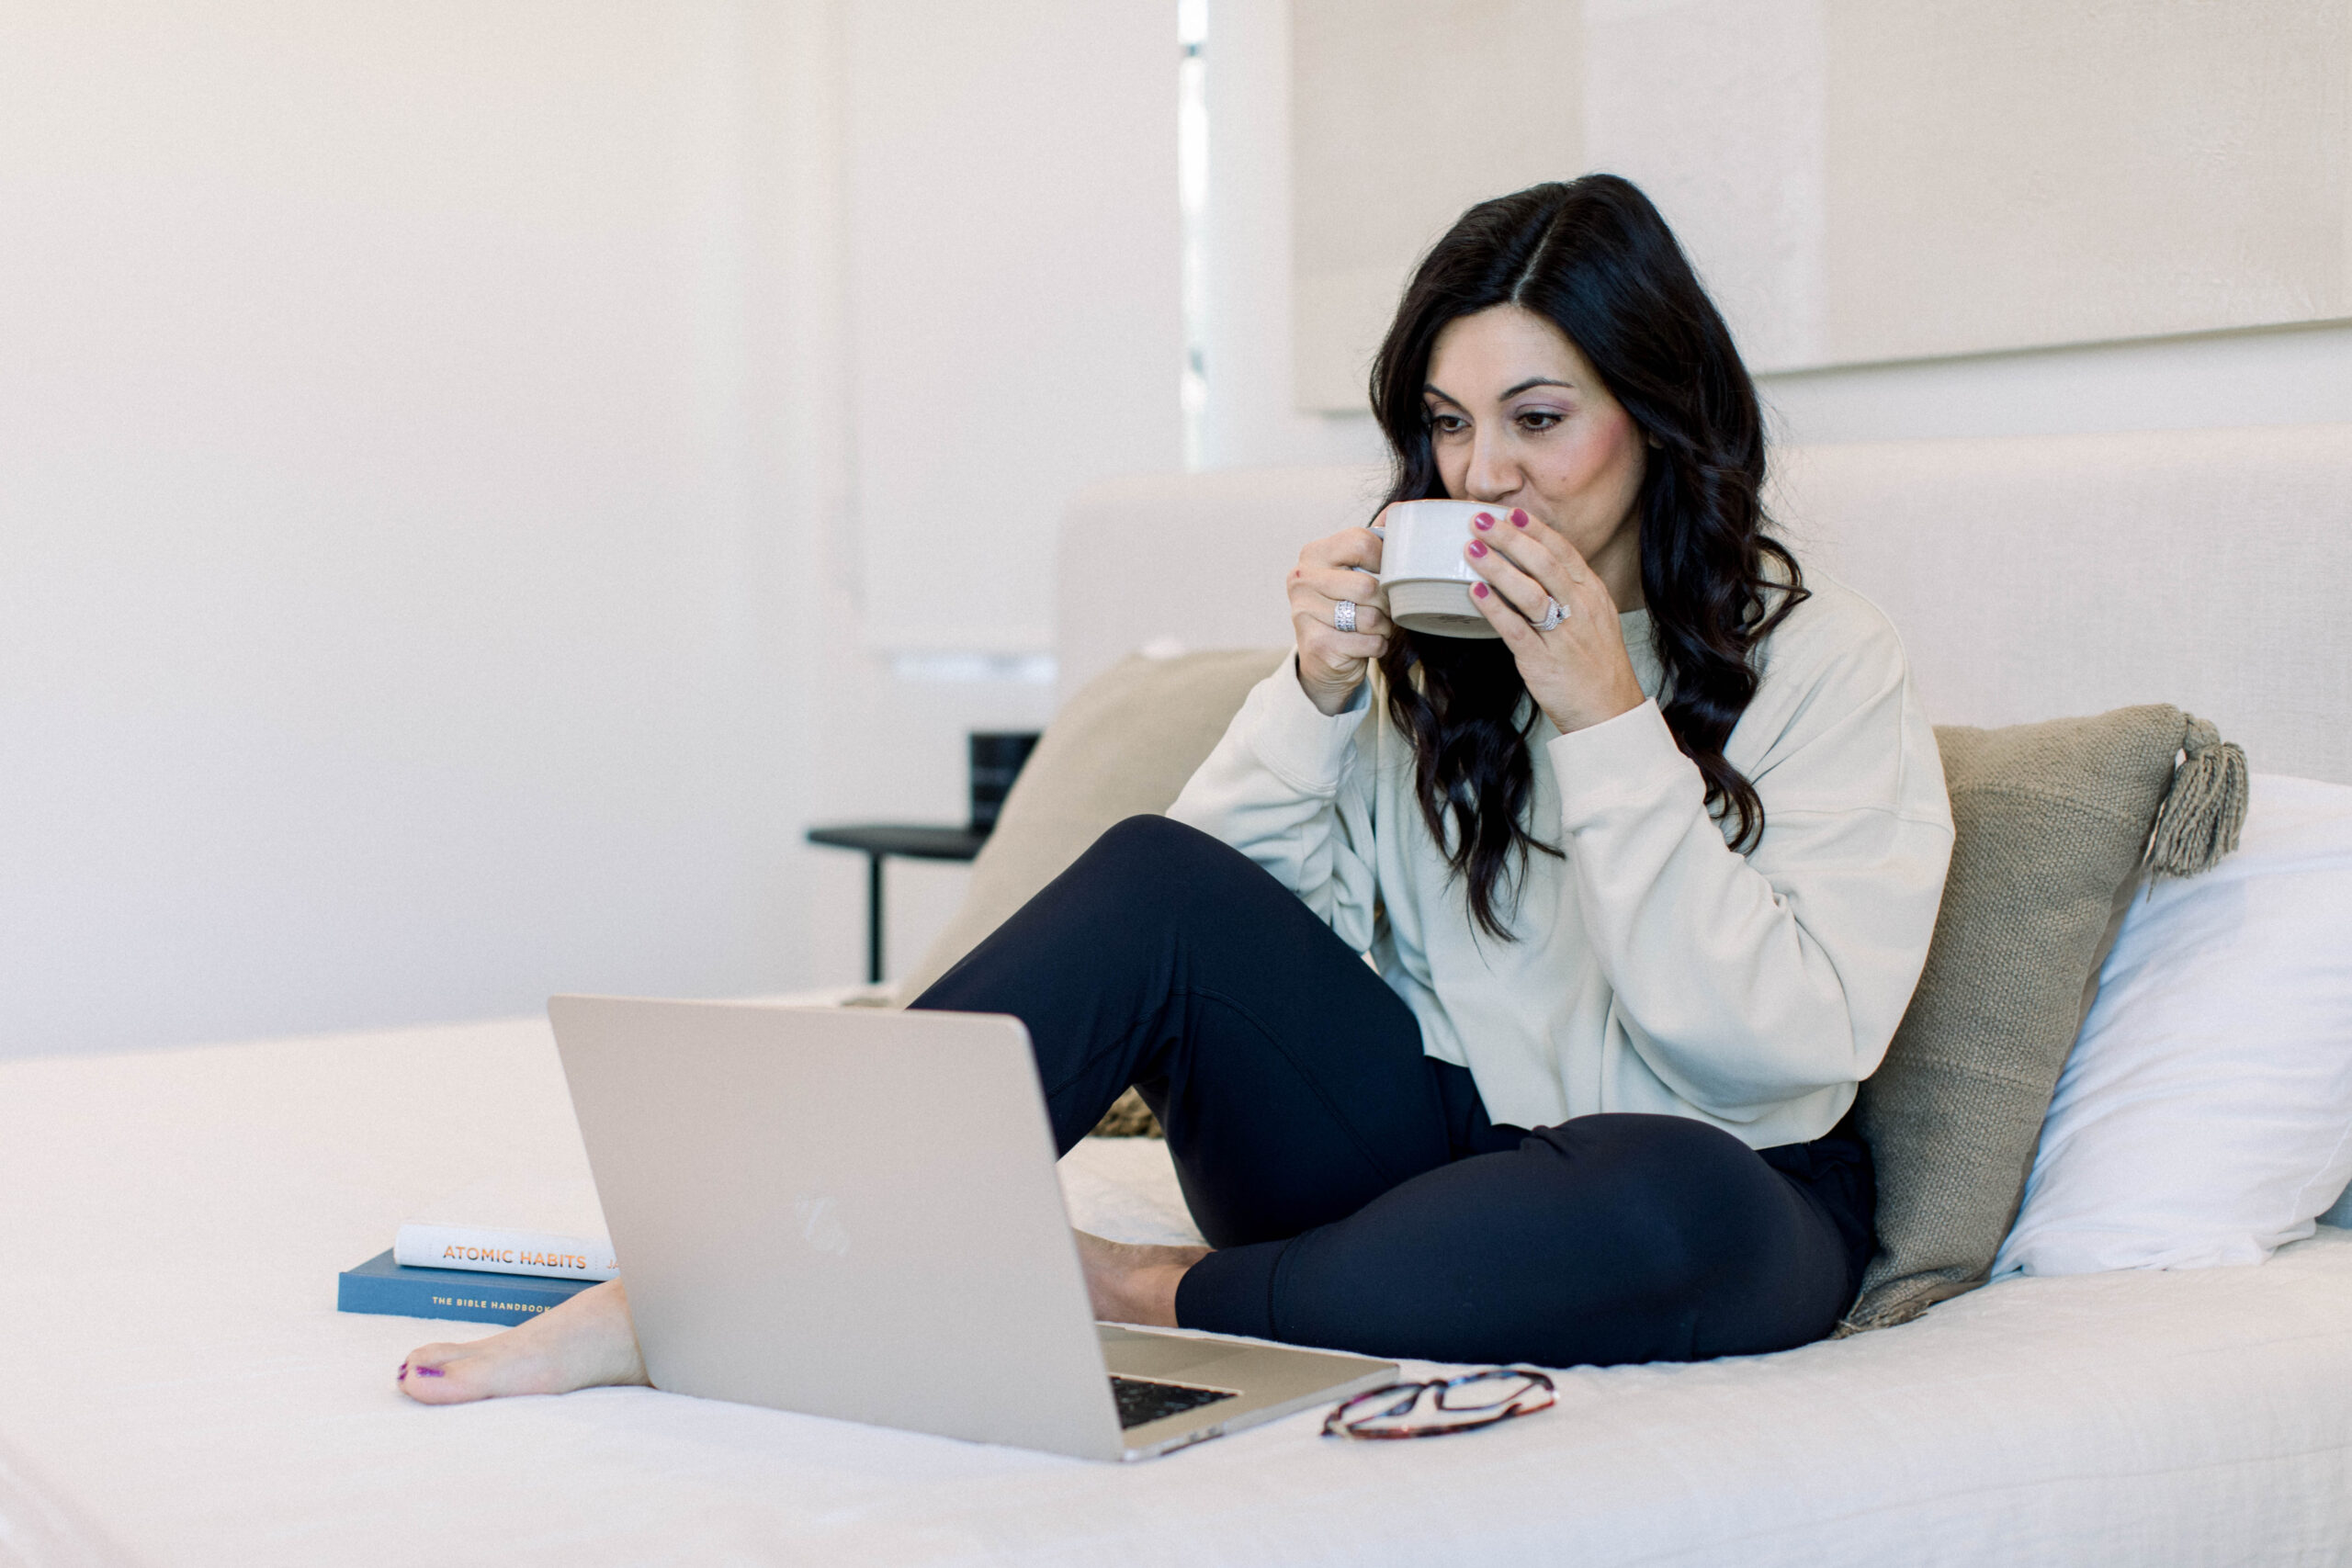 Image is a woman with dark hair drinking coffee on her bed while looking at her computer.